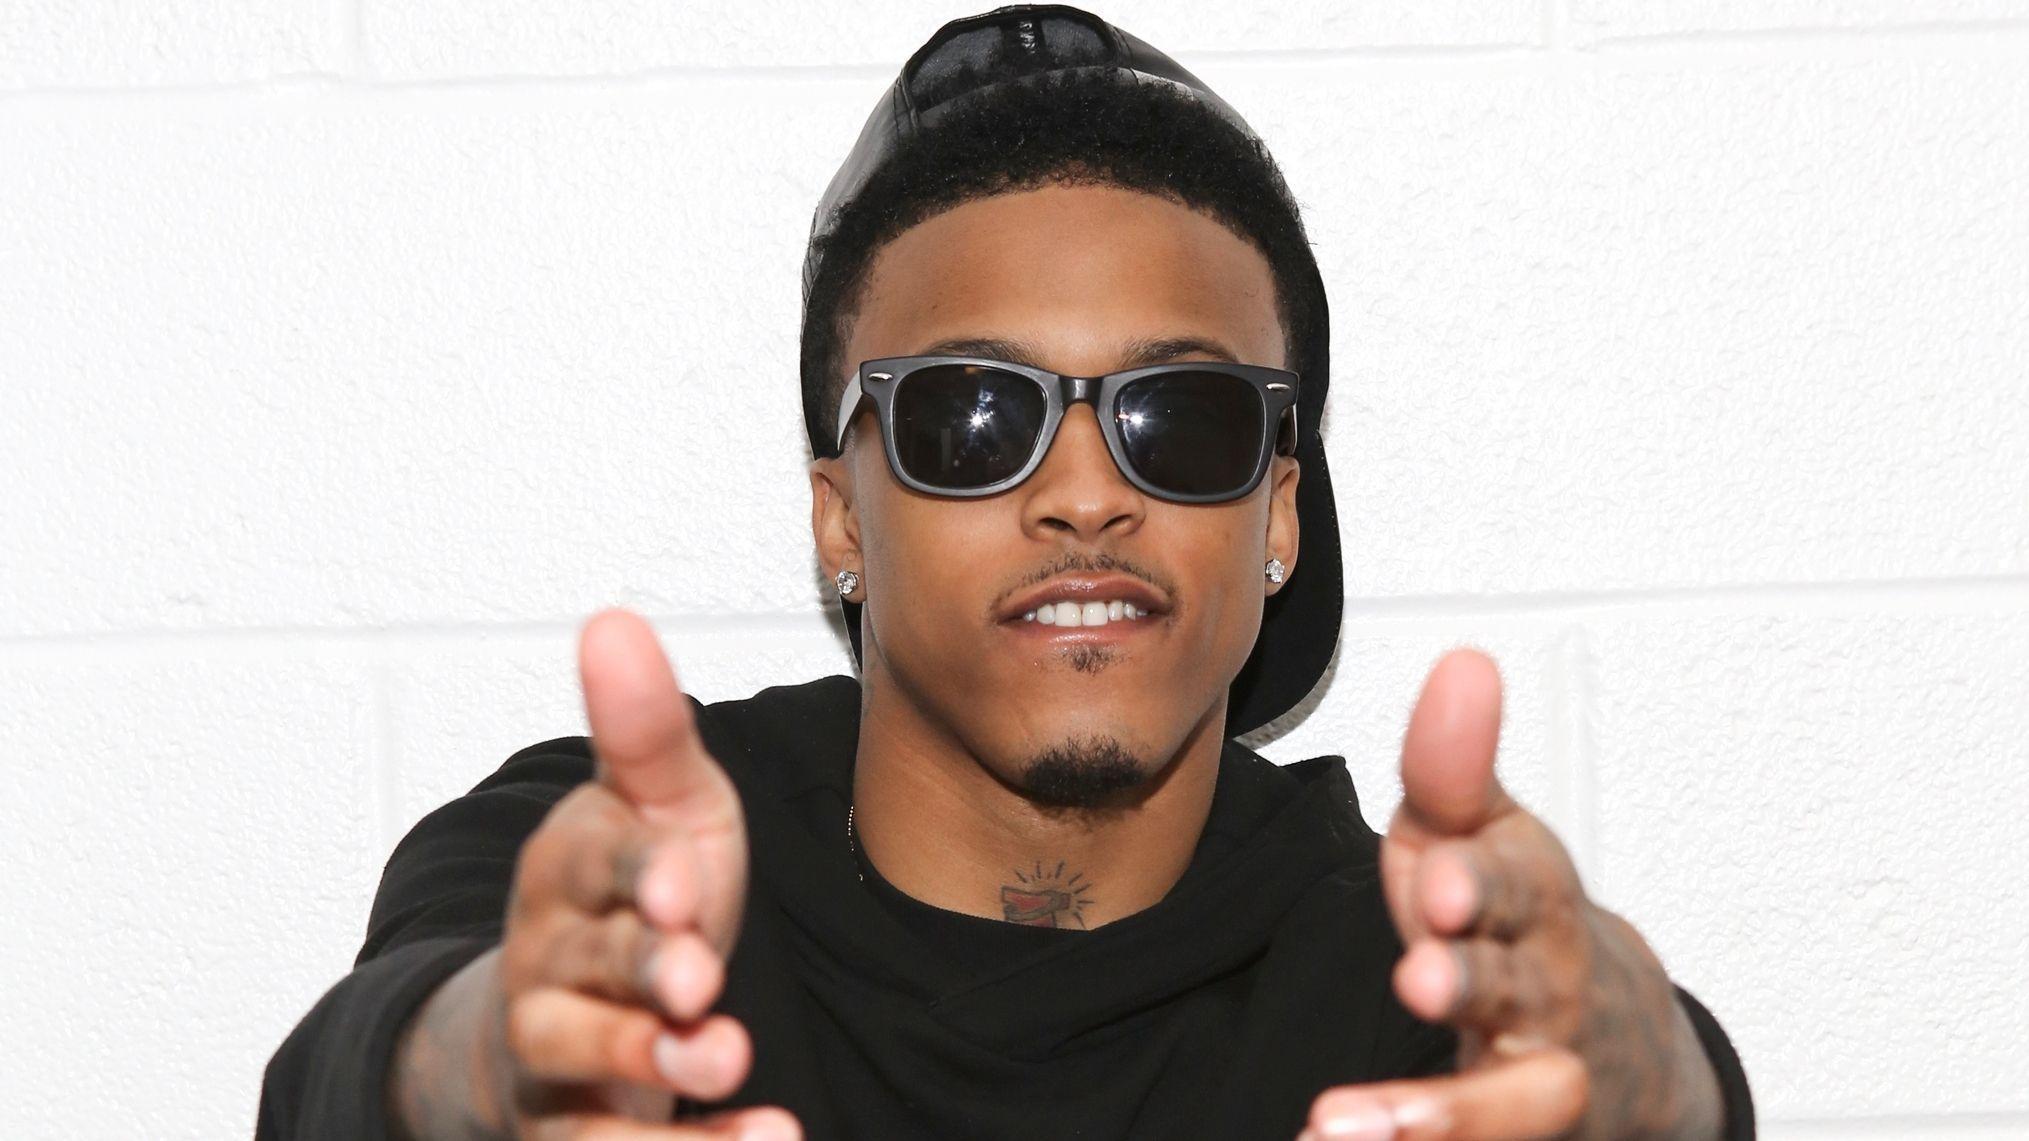 August Alsina Wallpaper Image Photo Picture Background